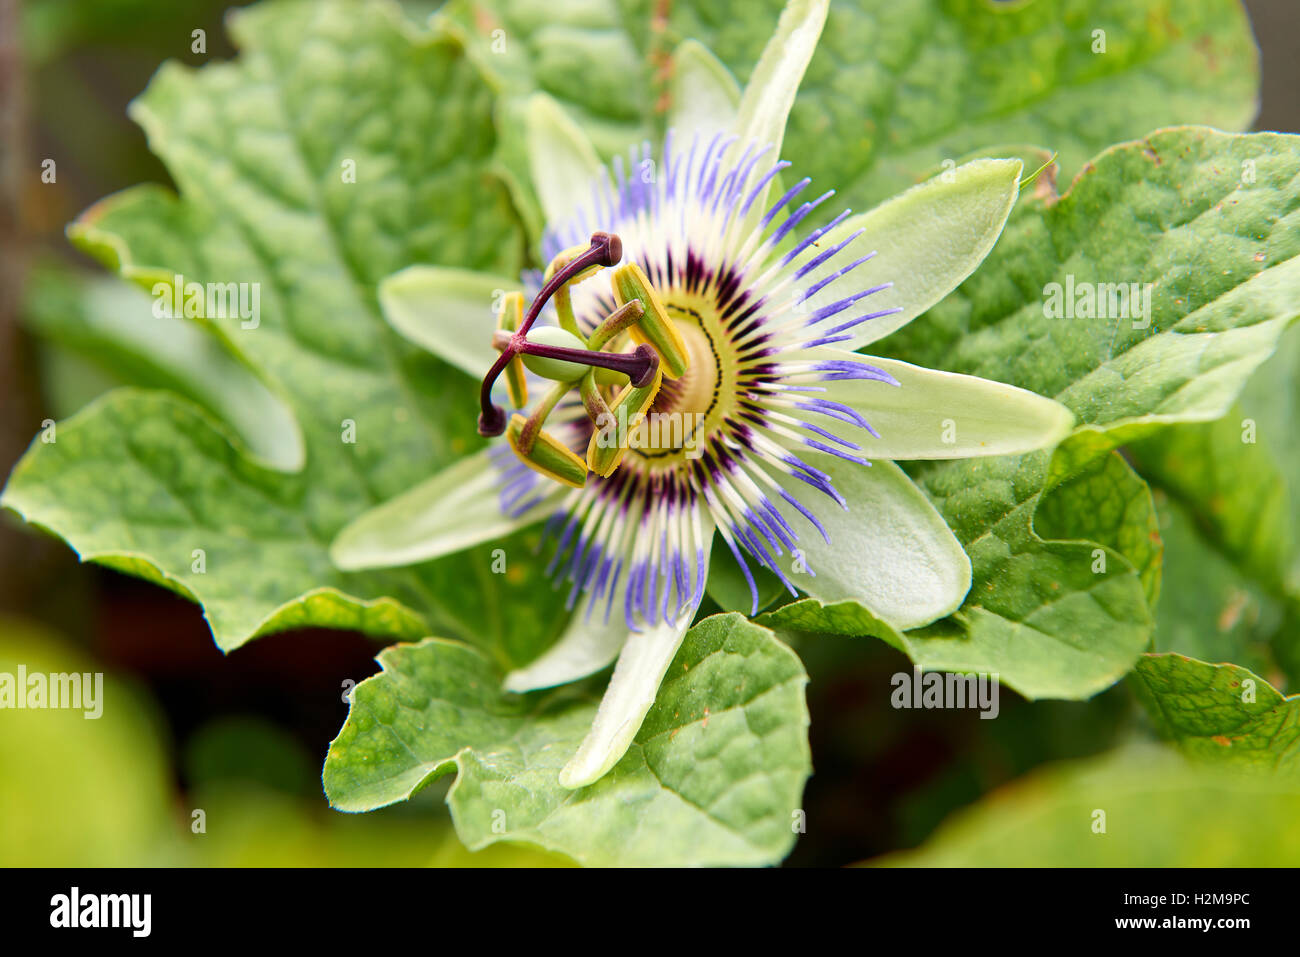 Blue and White Passion flowers or passion vines (Passiflora caerulea) Stock Photo